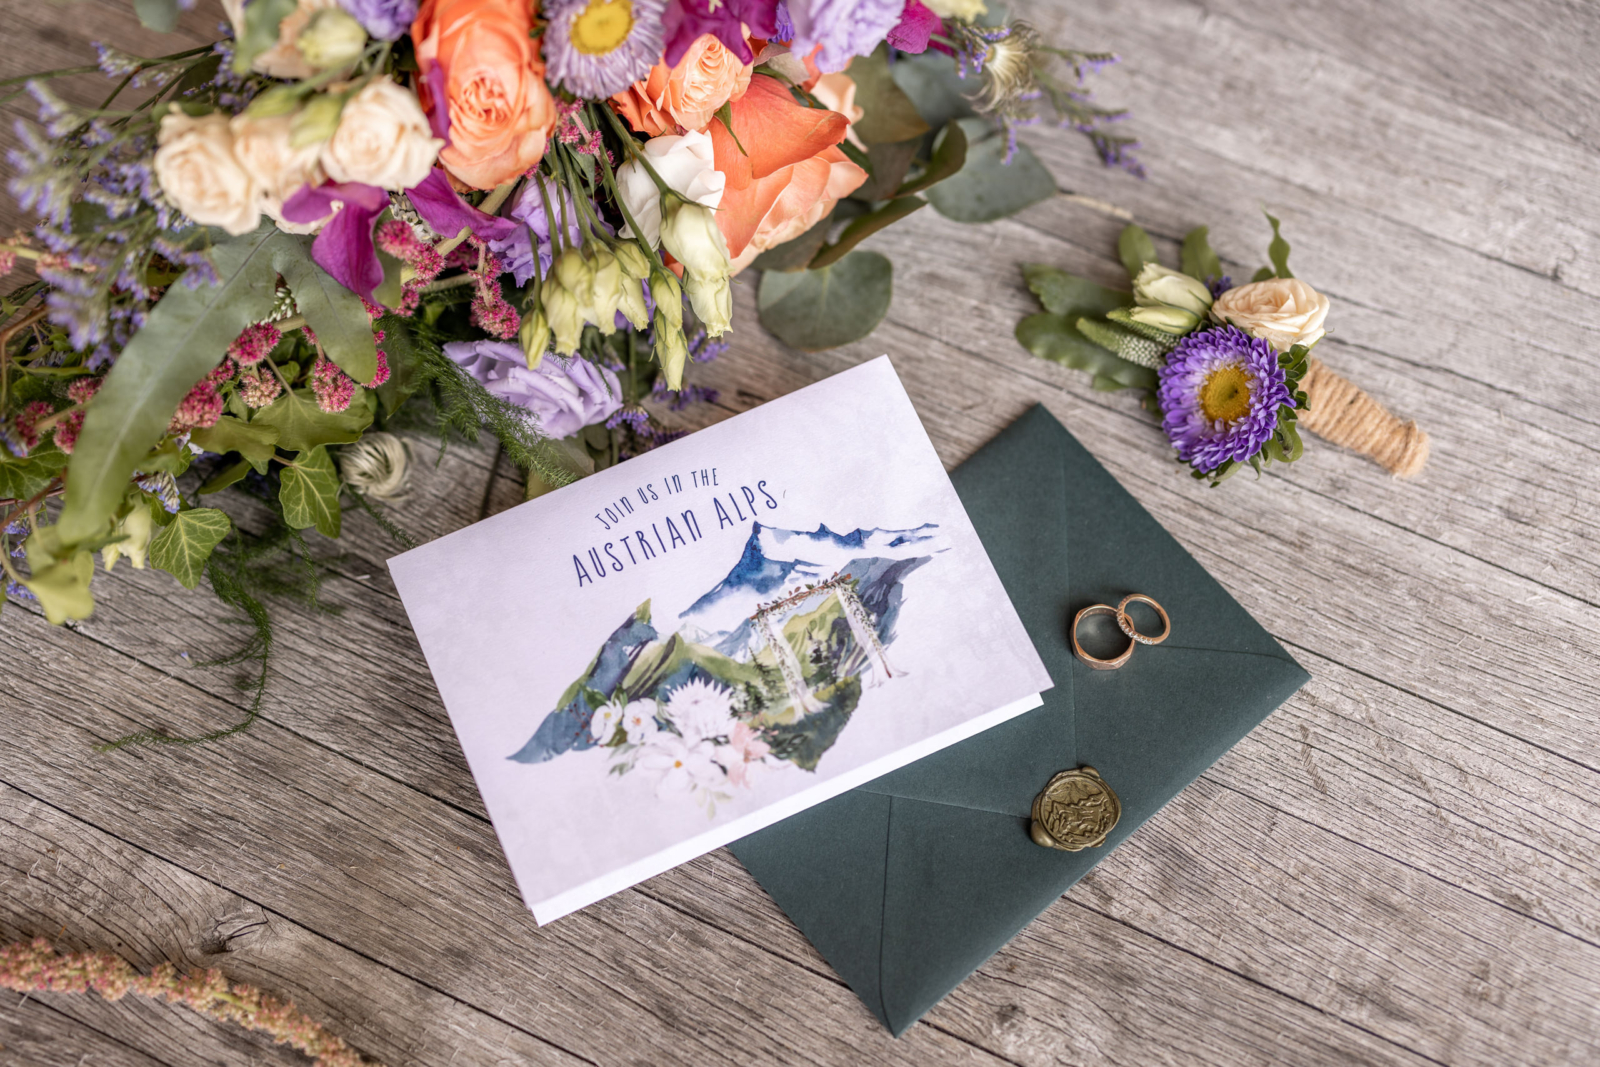 Invitation to the Destination Wedding in the Mountains in Austria